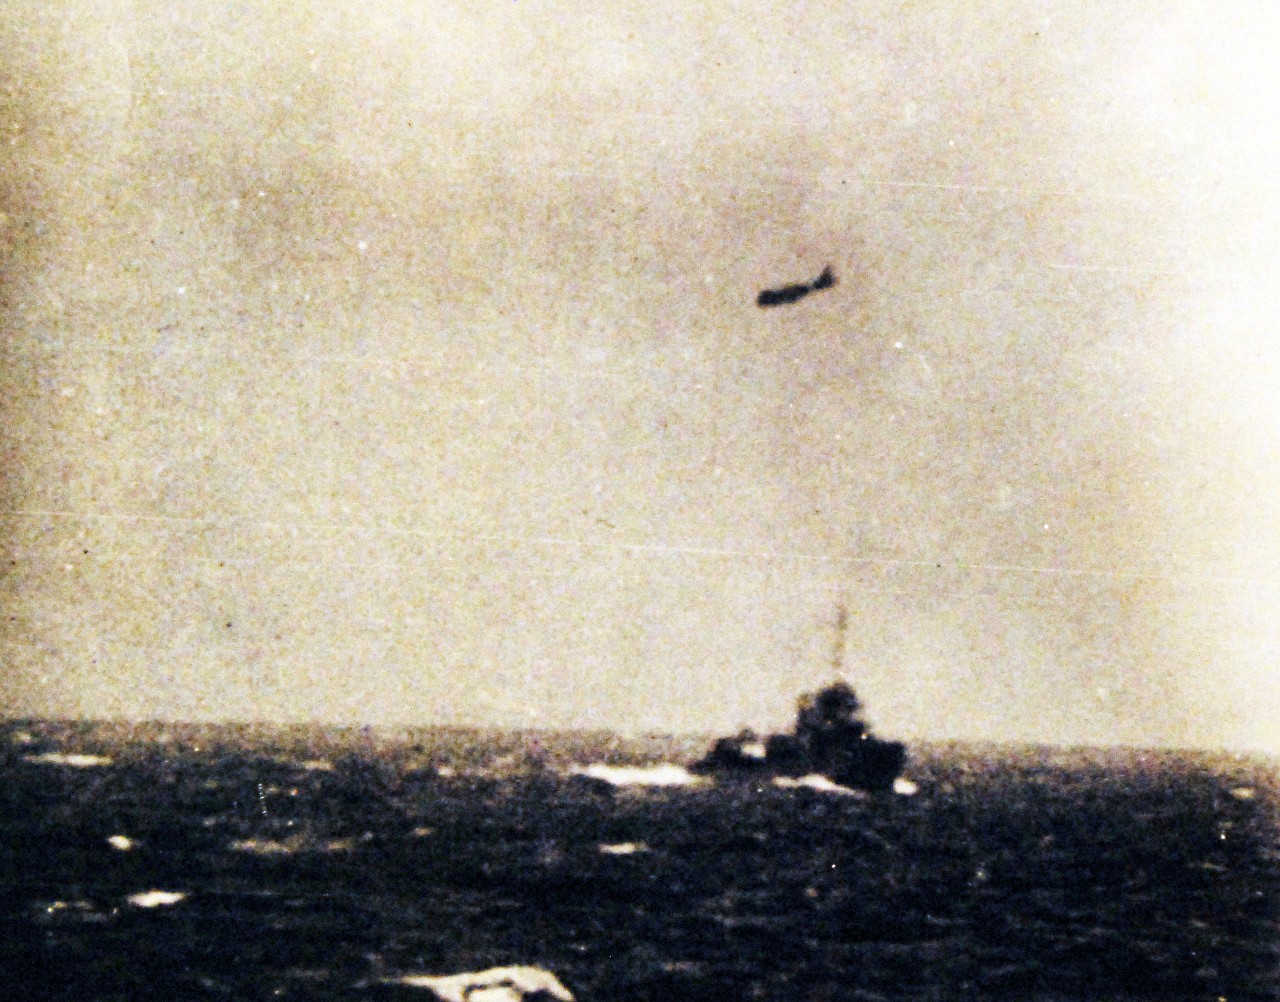 80-G-16639:   Battle of the Coral Sea, May 1942.  A Japanese plane passes over a U.S. destroyer during attacks on the U.S. aircraft carriers, late in the morning of 8 May 1942.  (4/10/2014).